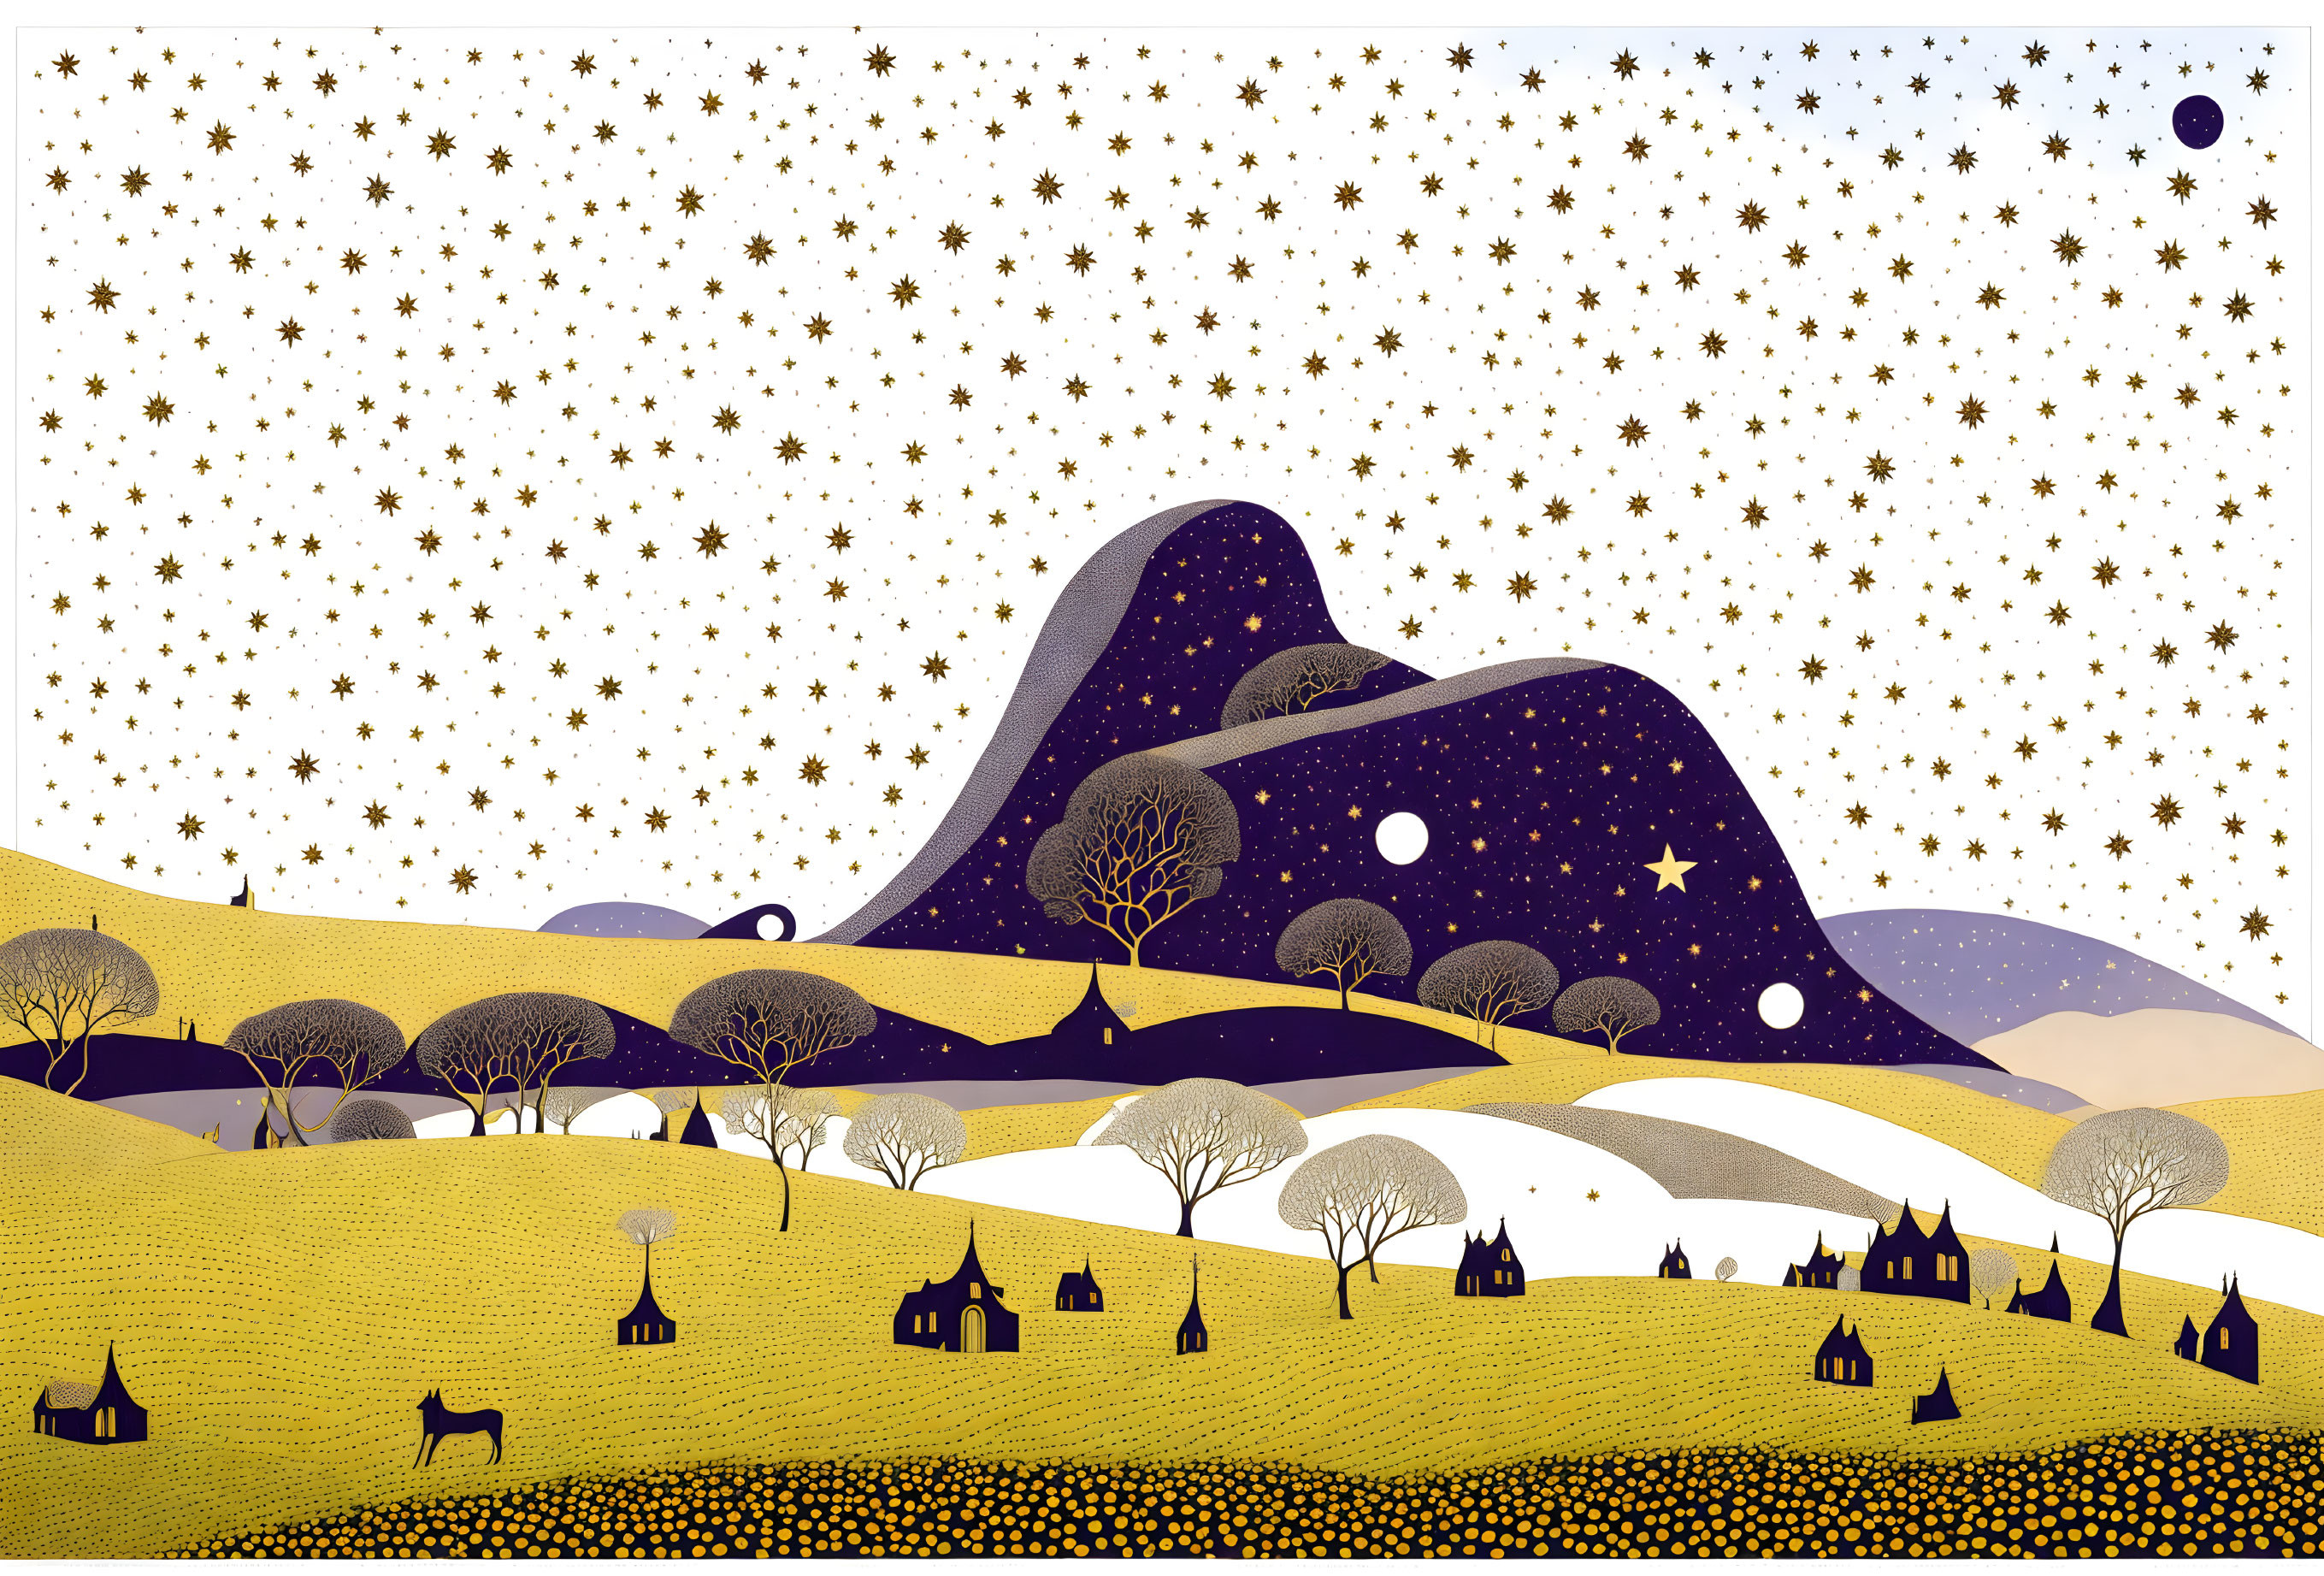 Whimsical landscape with starry skies, rolling hills, trees, houses, dog, and hot